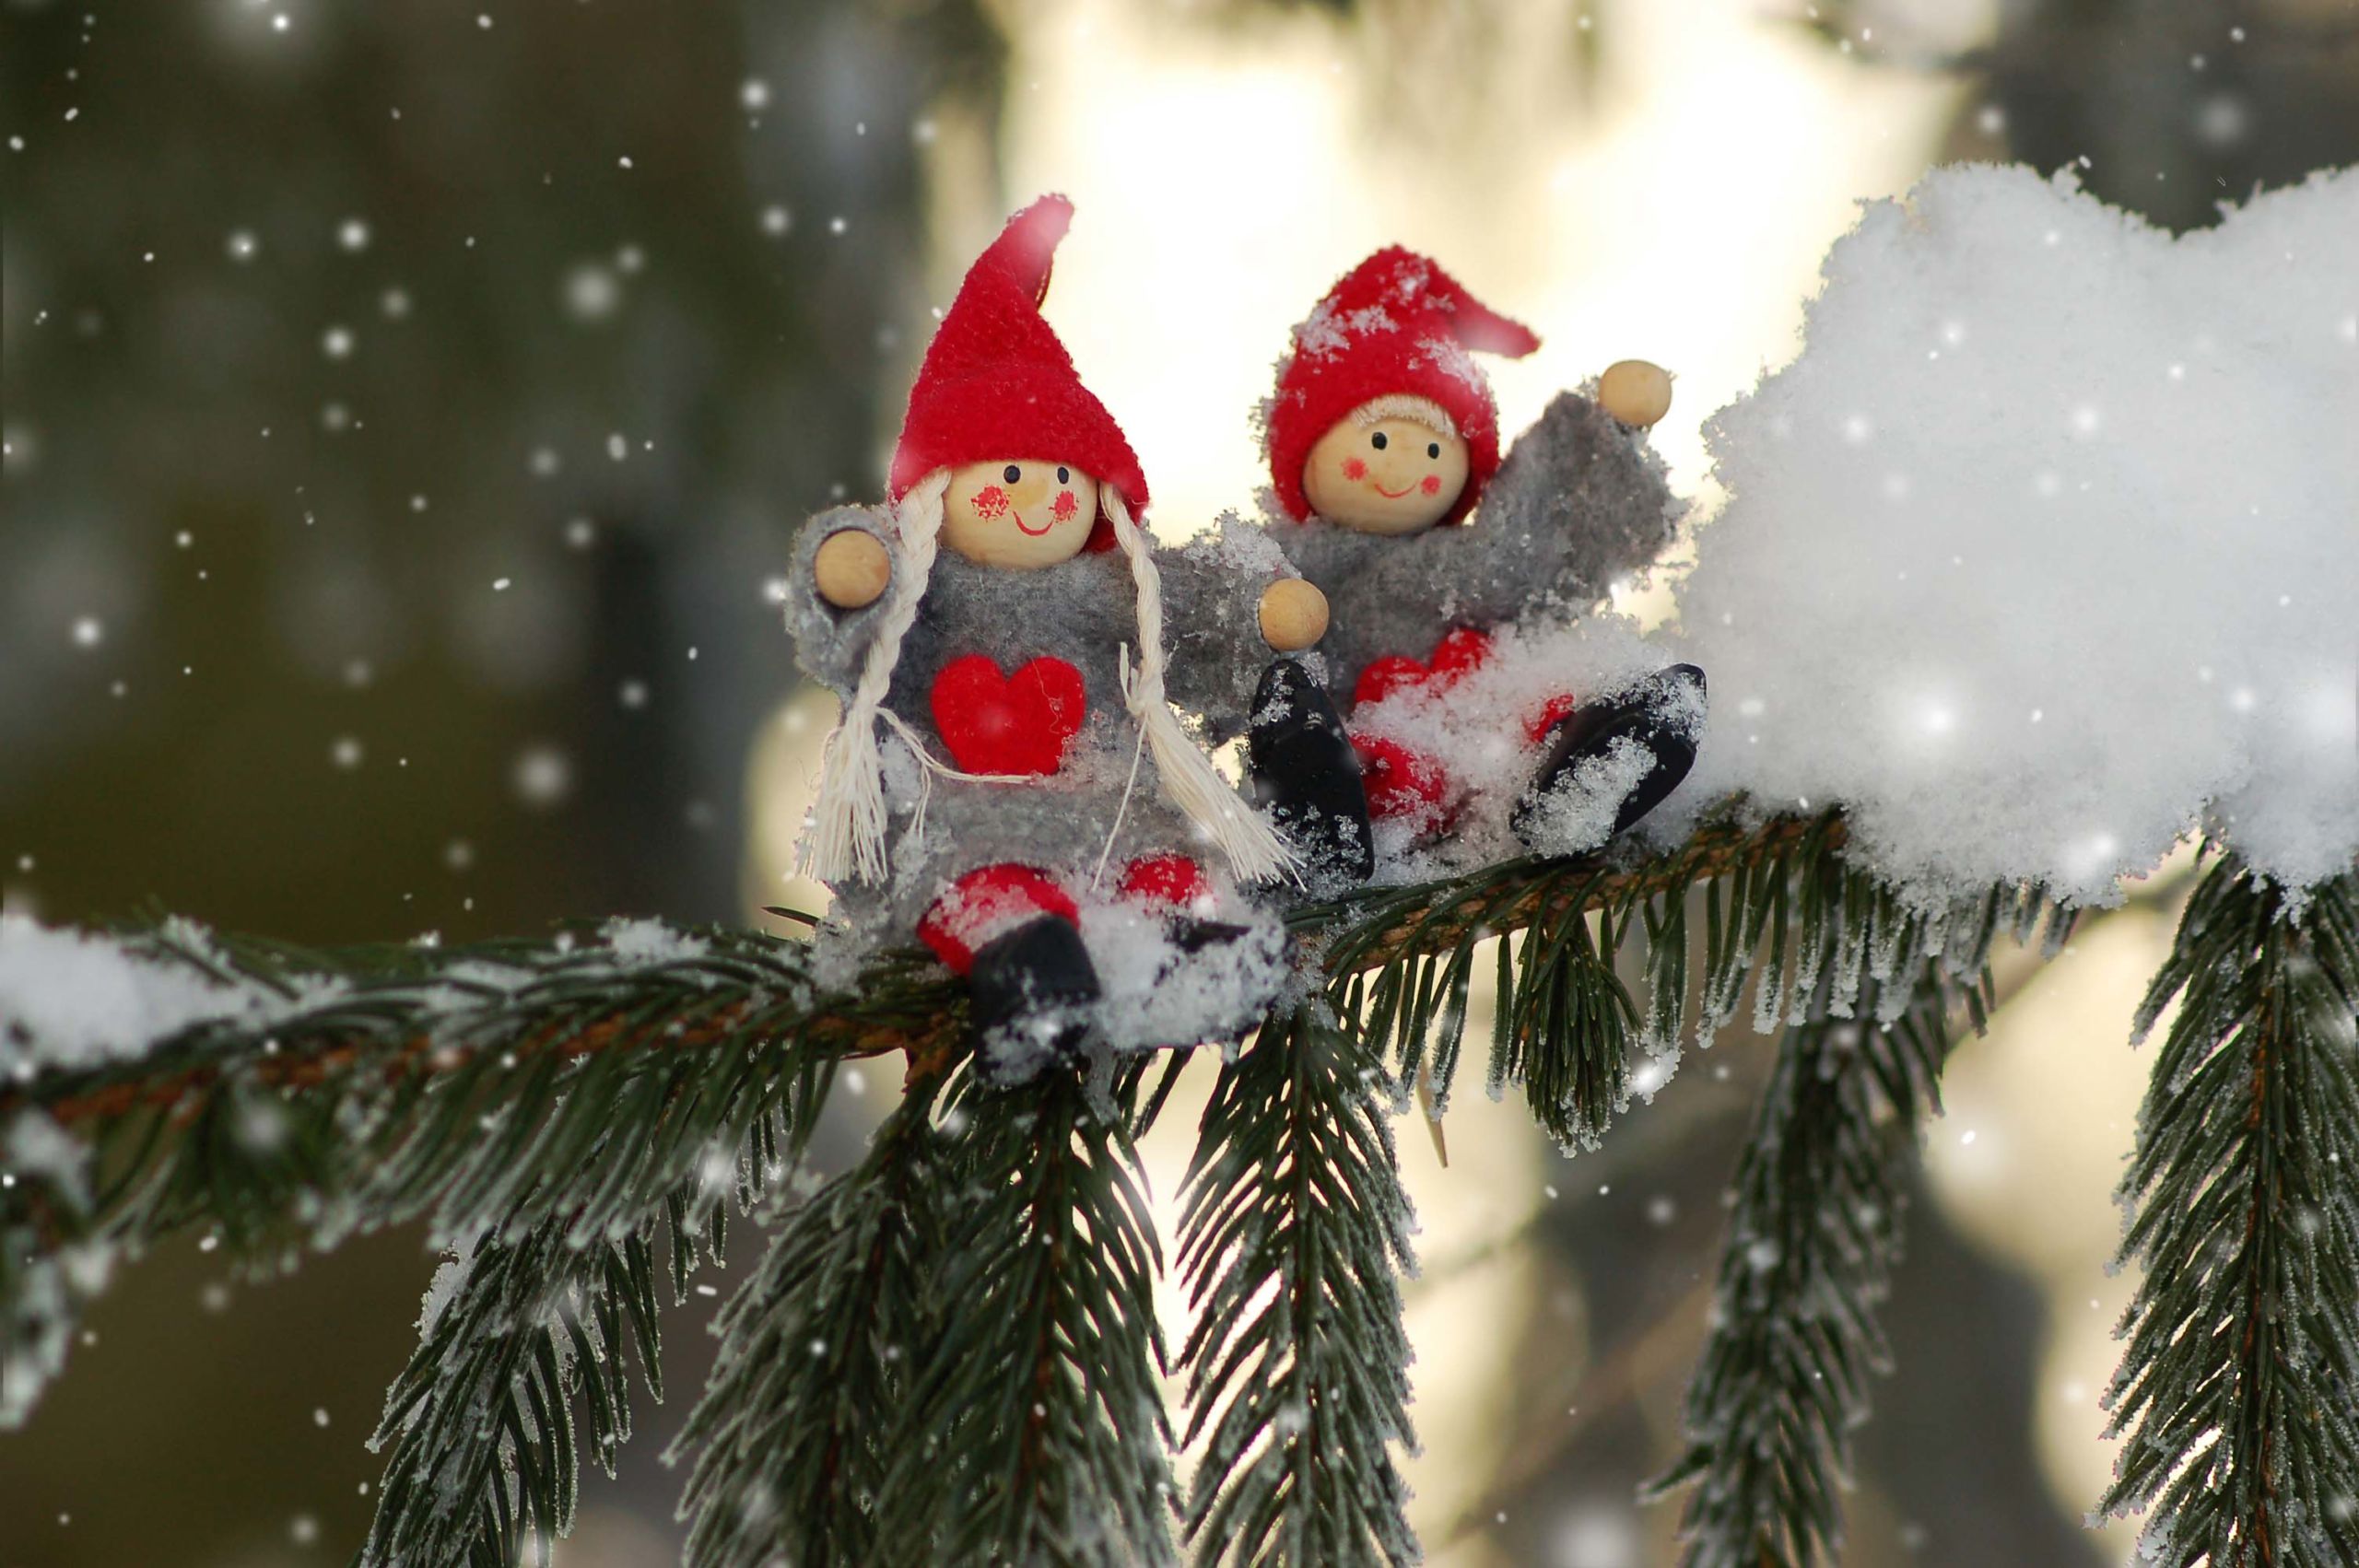 Two elves sitting on a snowy tree branch